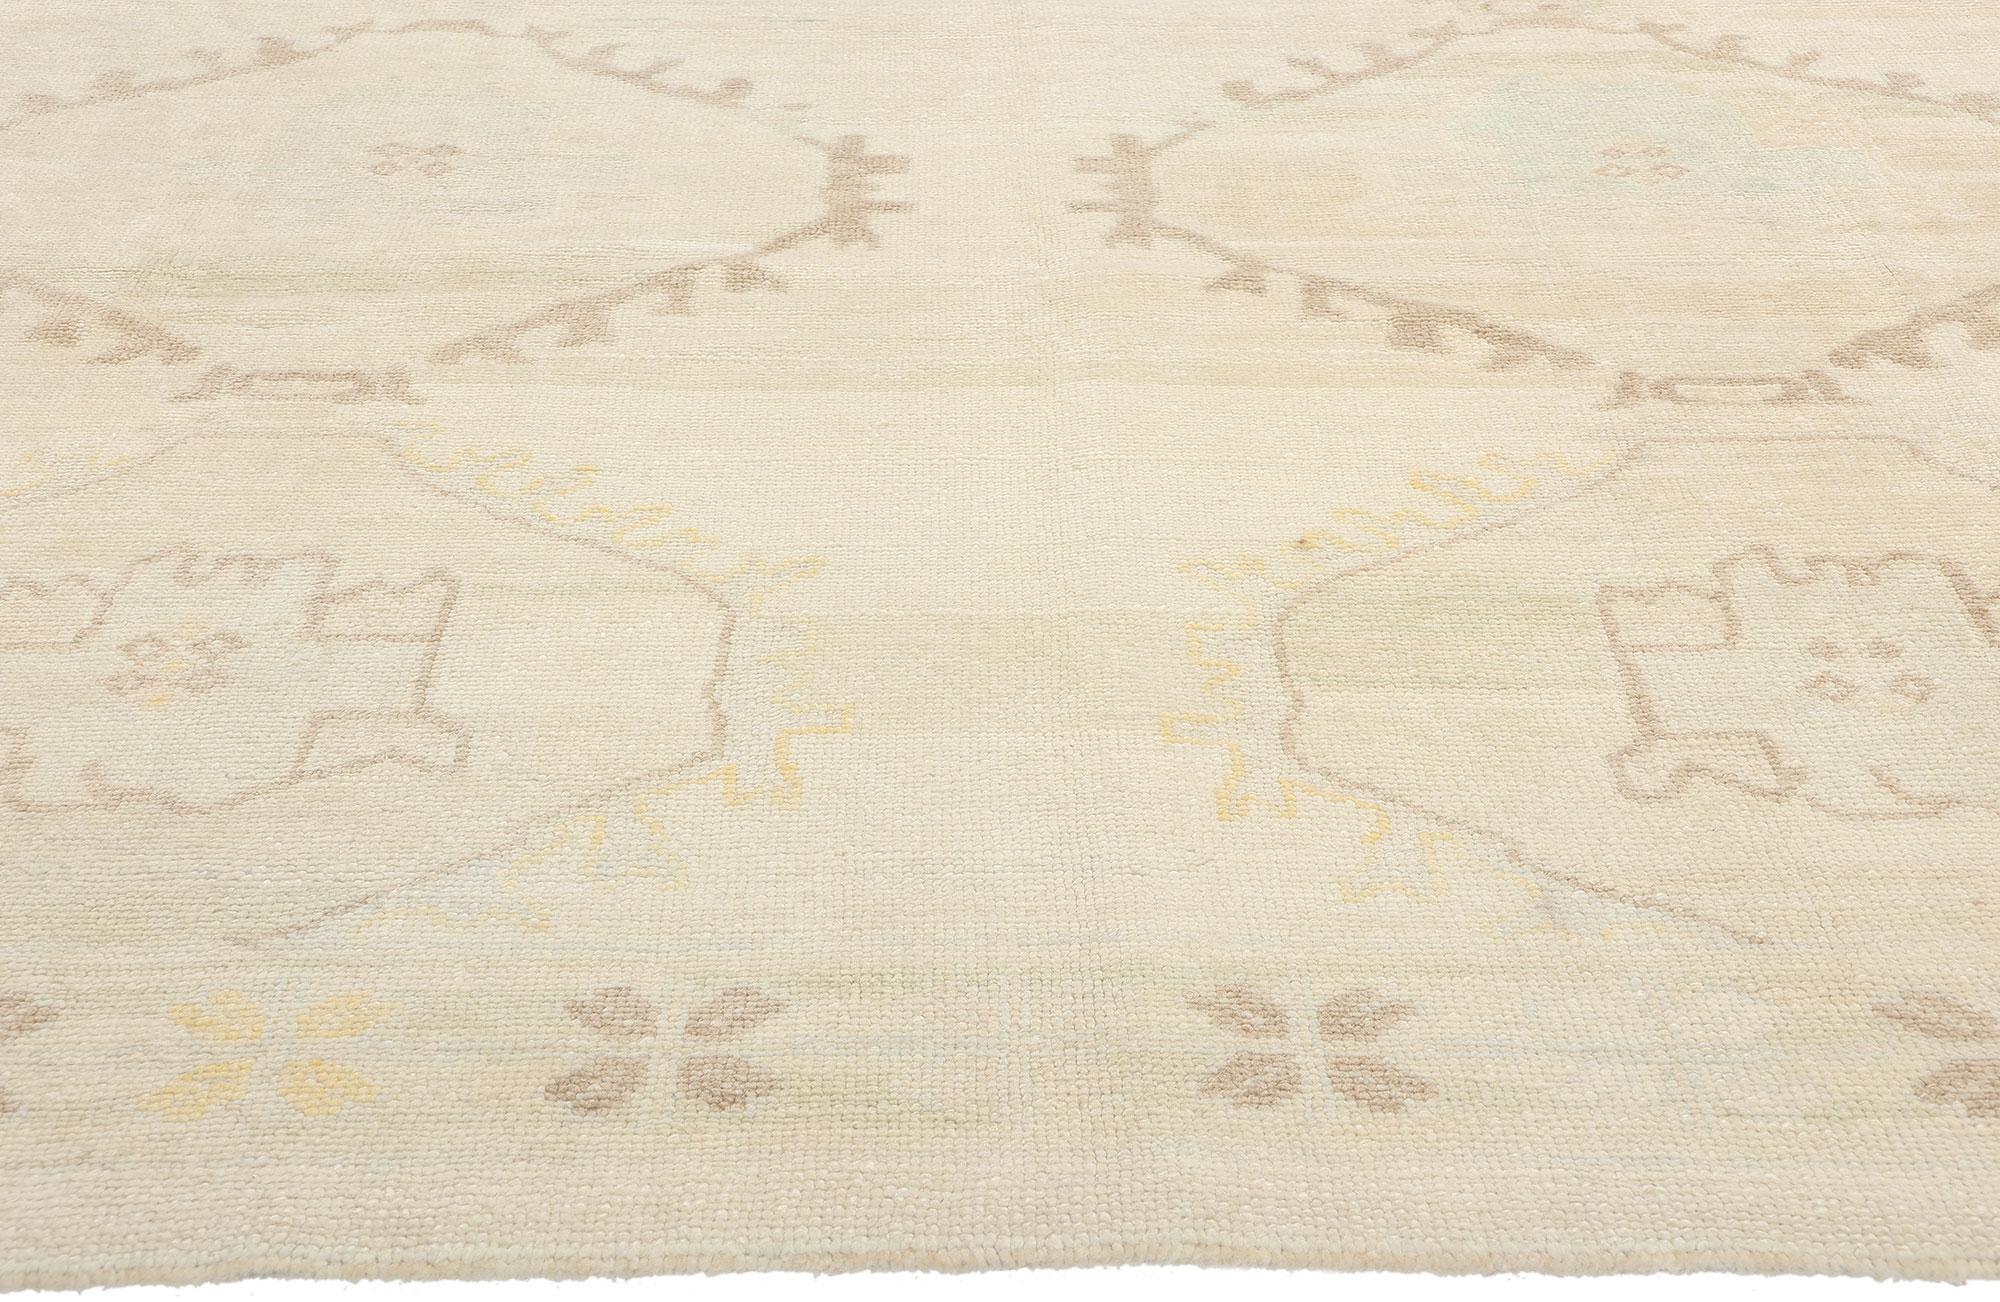 Hand-Knotted Contemporary Muted Earth-Tone Vintage Turkish Kars Oushak Rug, 08'11 x 12'08 For Sale